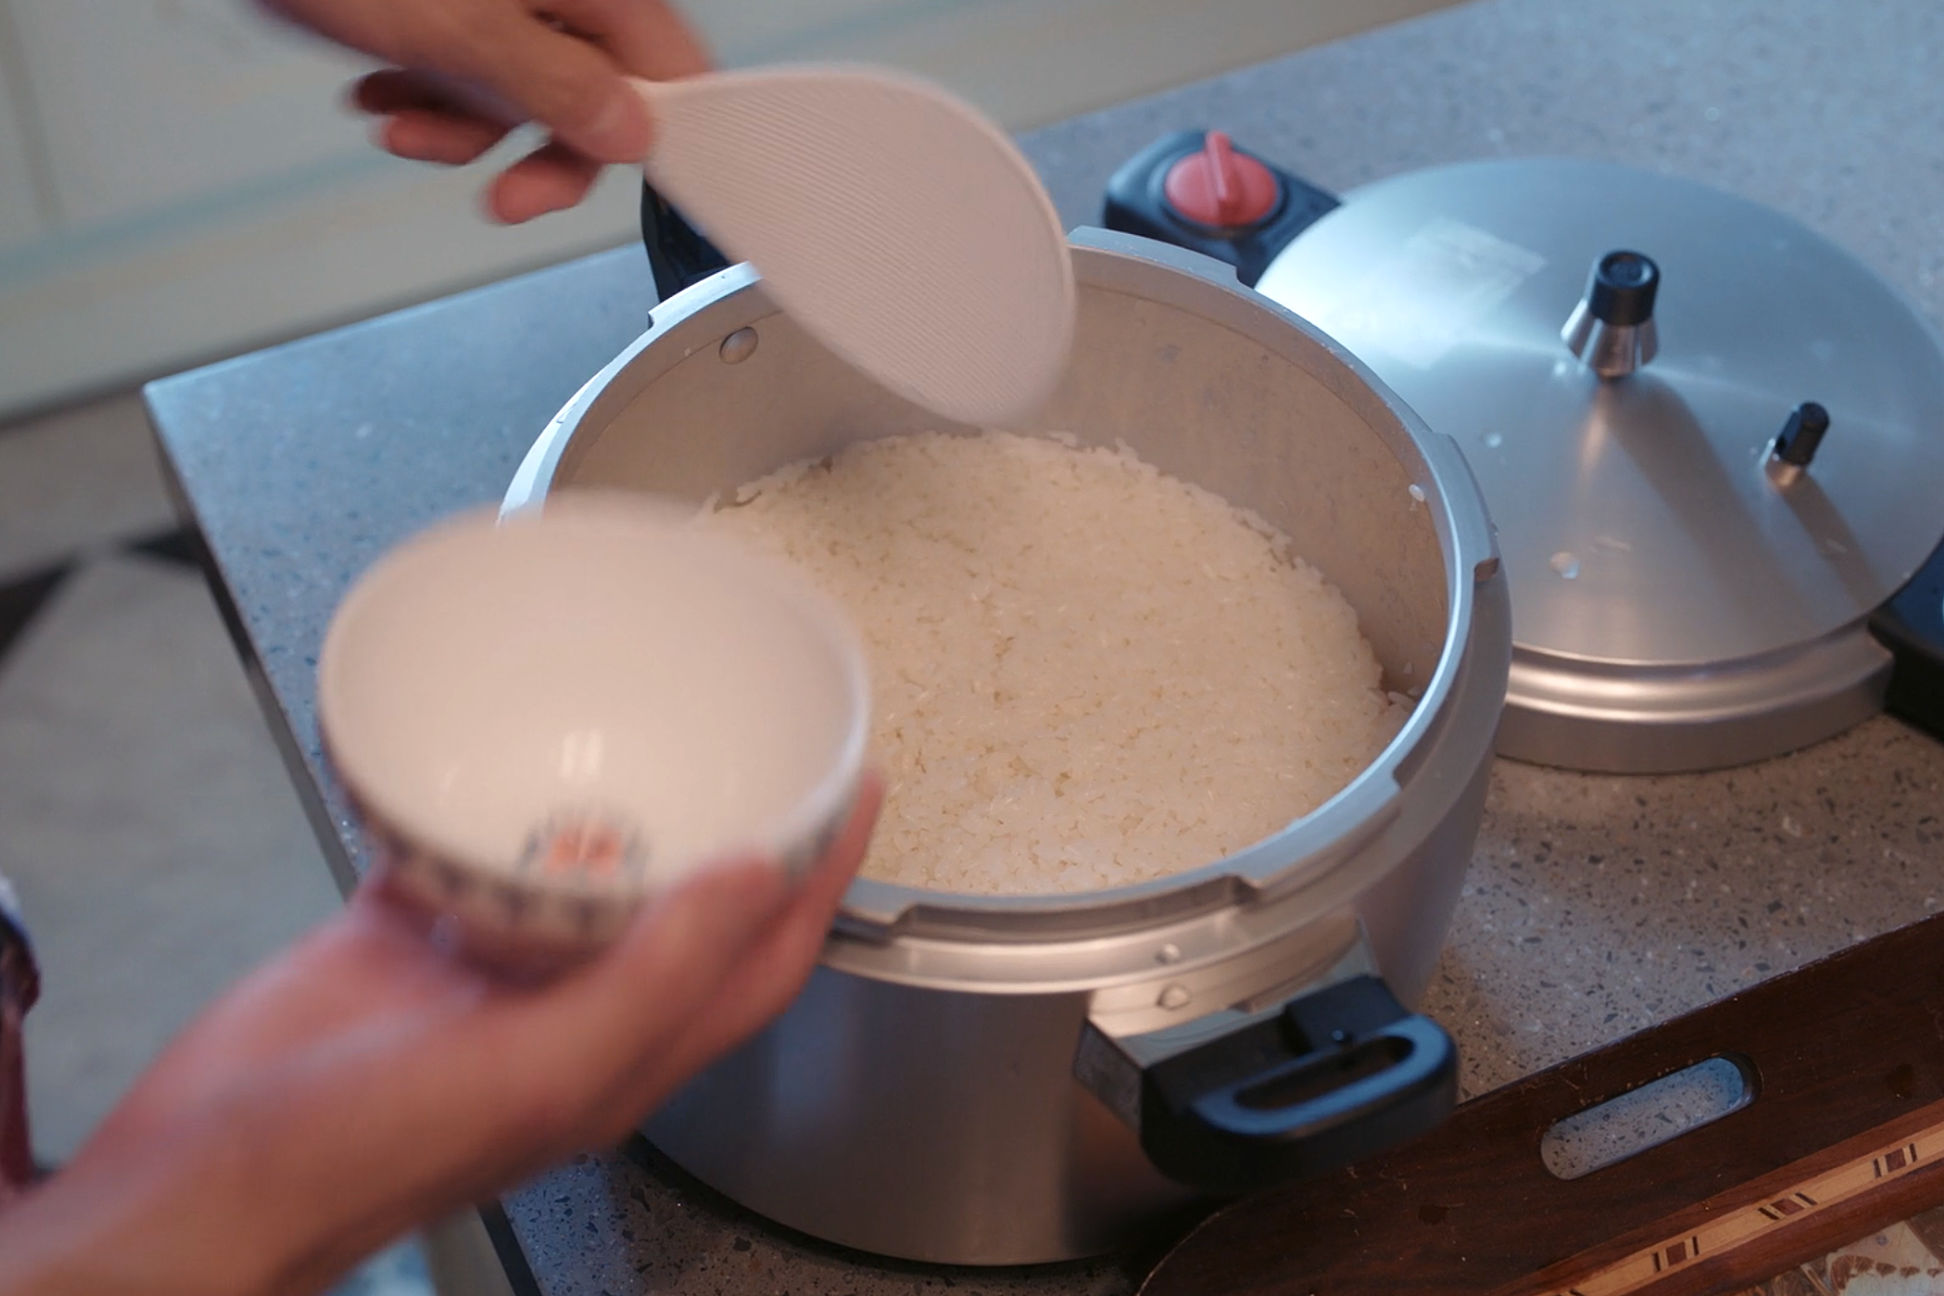 White rice is often boiled in a pressure cooker